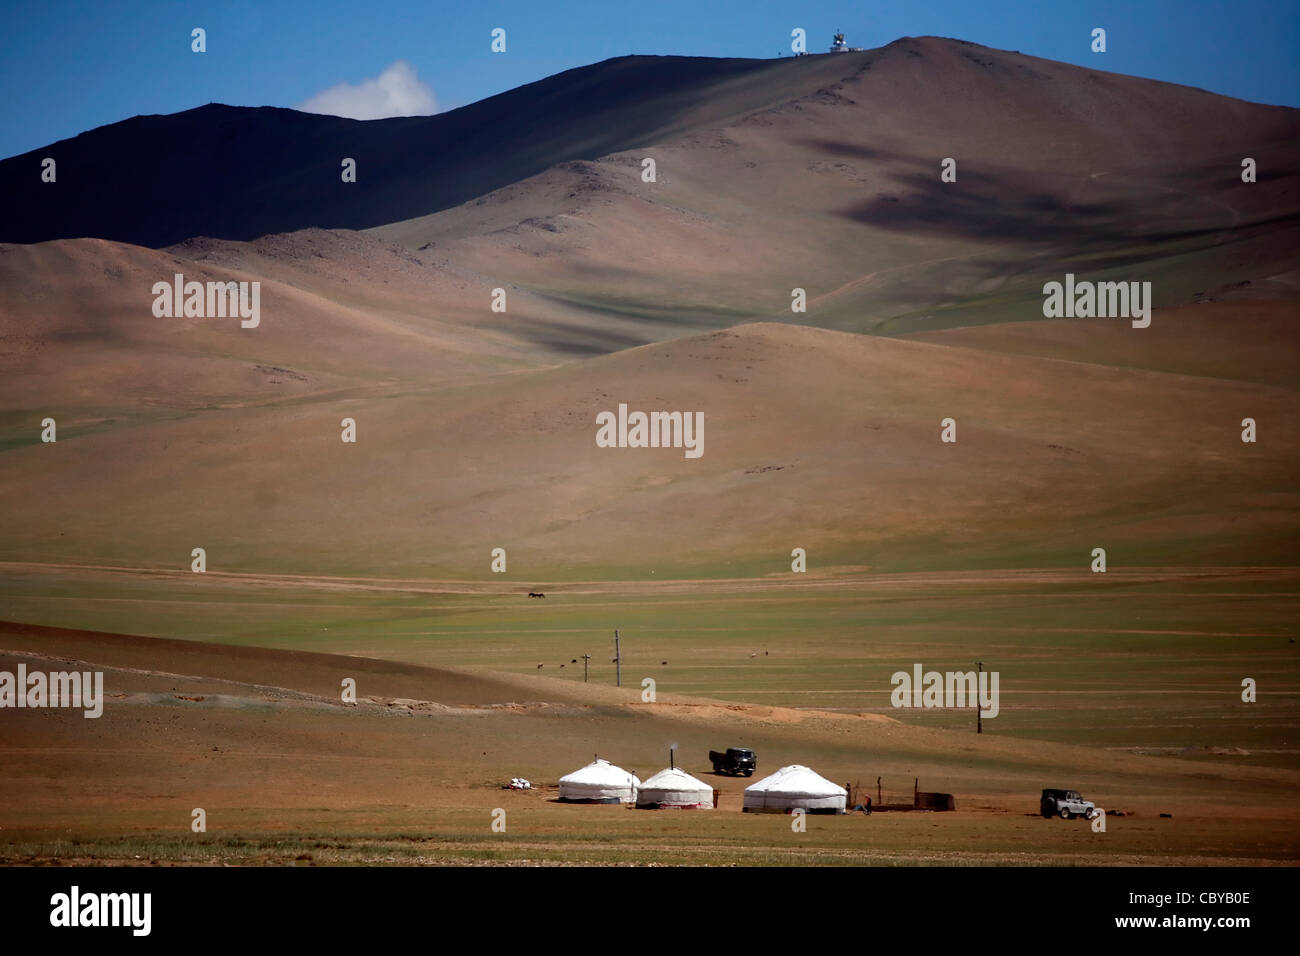 Yurts on a green field in Mongolia Stock Photo